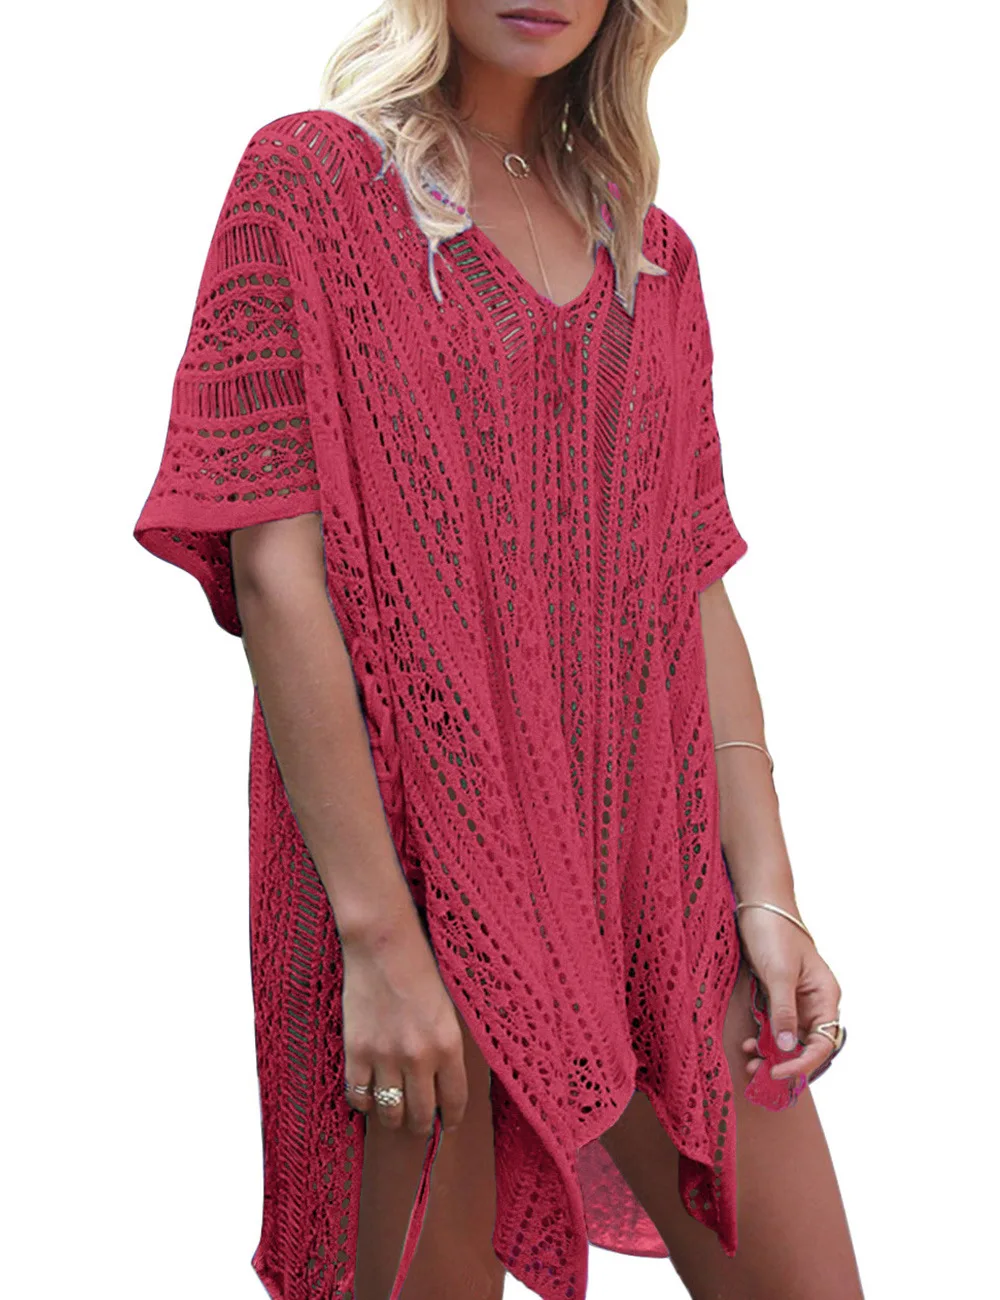 Sunscreen Blouse Swimsuit Women's Beach Handmade Crochet Hollow Blouse Sunscreen Clothing Knitted Swimsuit Beach Cover Up bathing suit with matching cover up